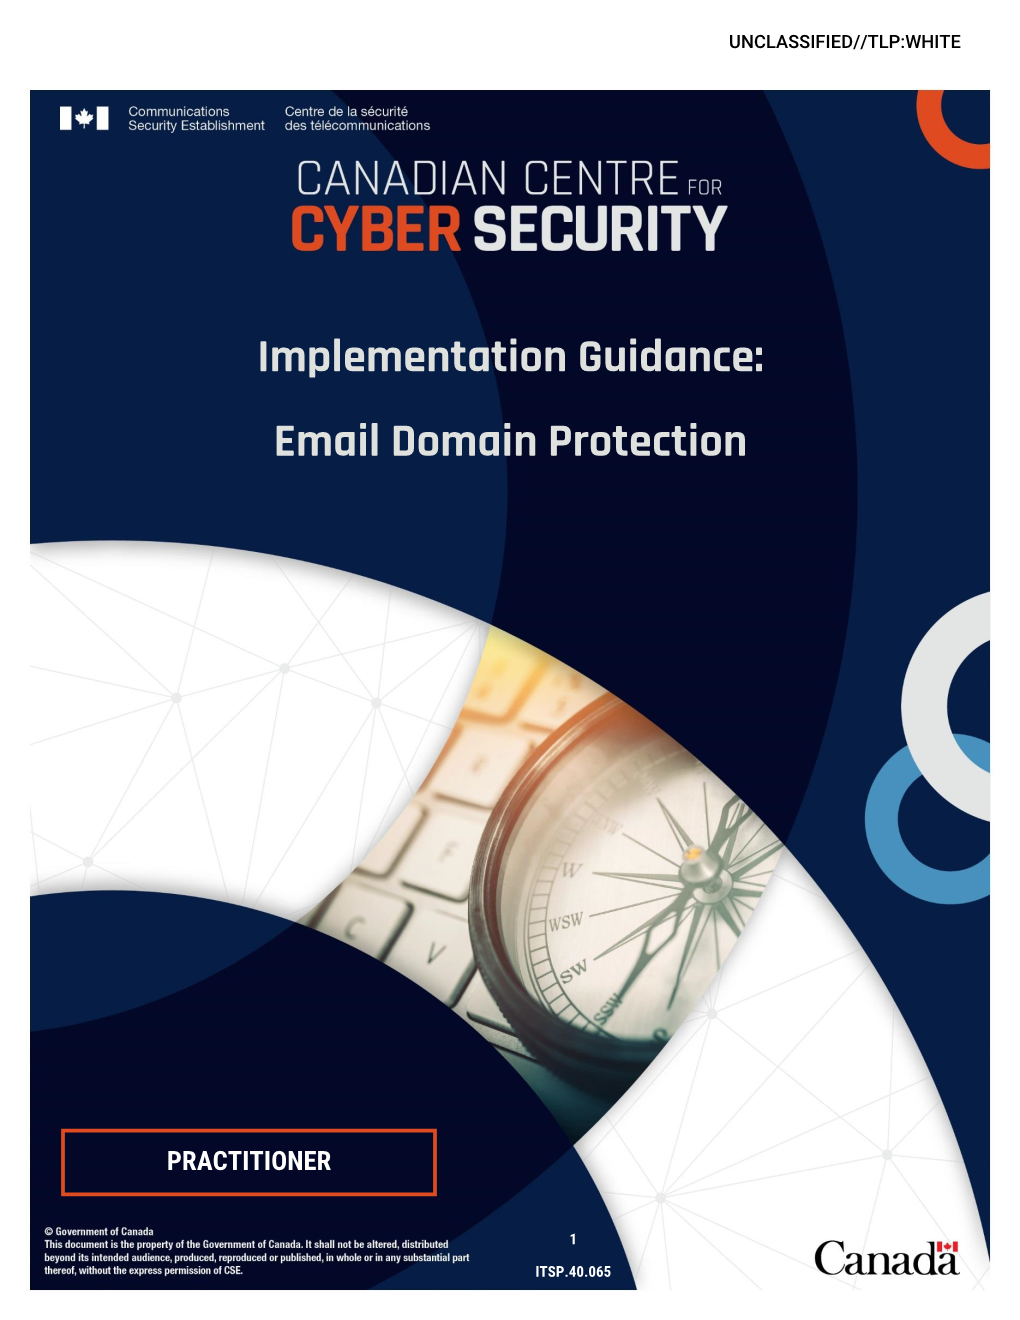 Implementation Guidance: Email Domain Protection